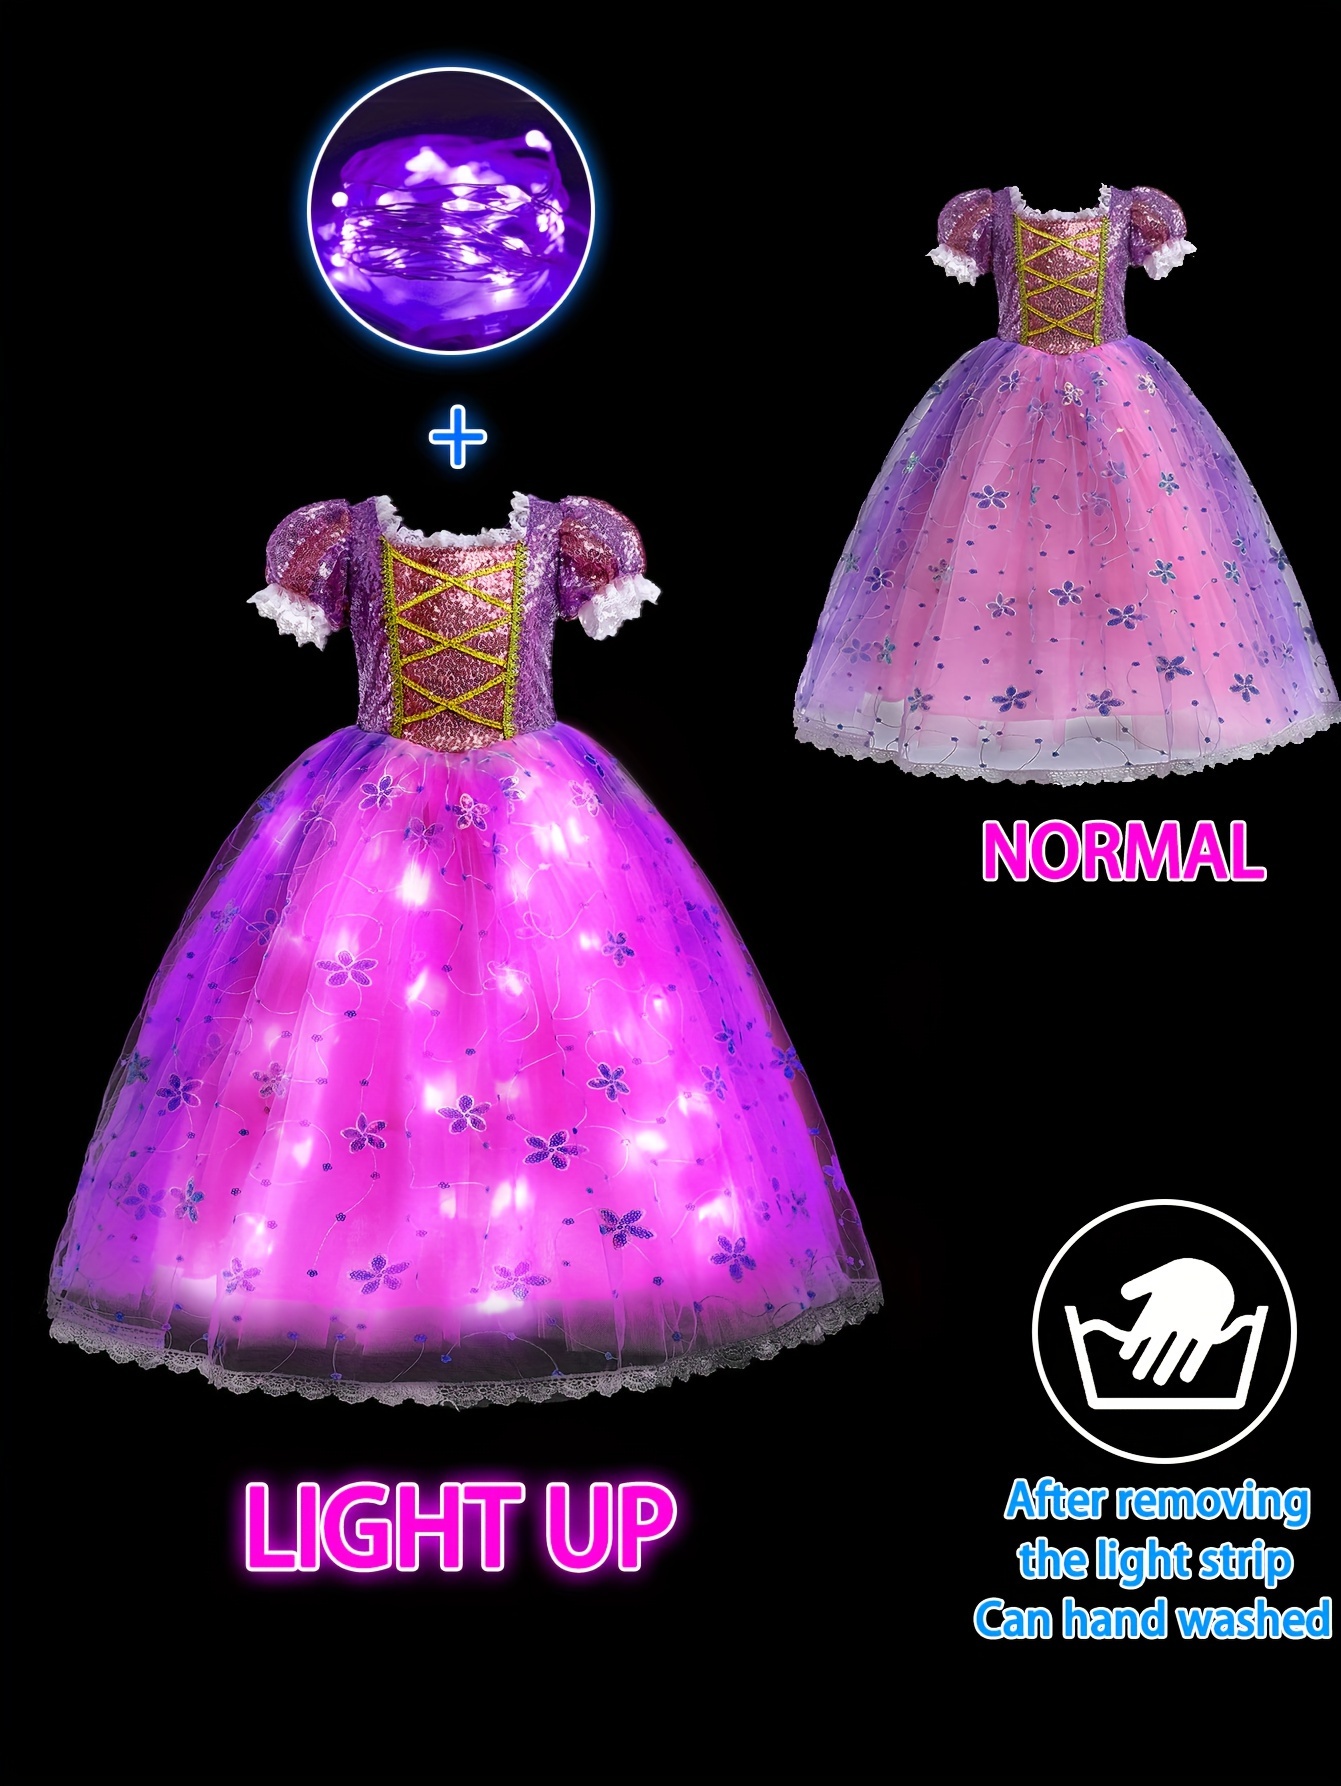 sequin decor puff short sleeve princess dress dreamy led dresses for girls carnival birthday party performance halloween prom gift battery not included